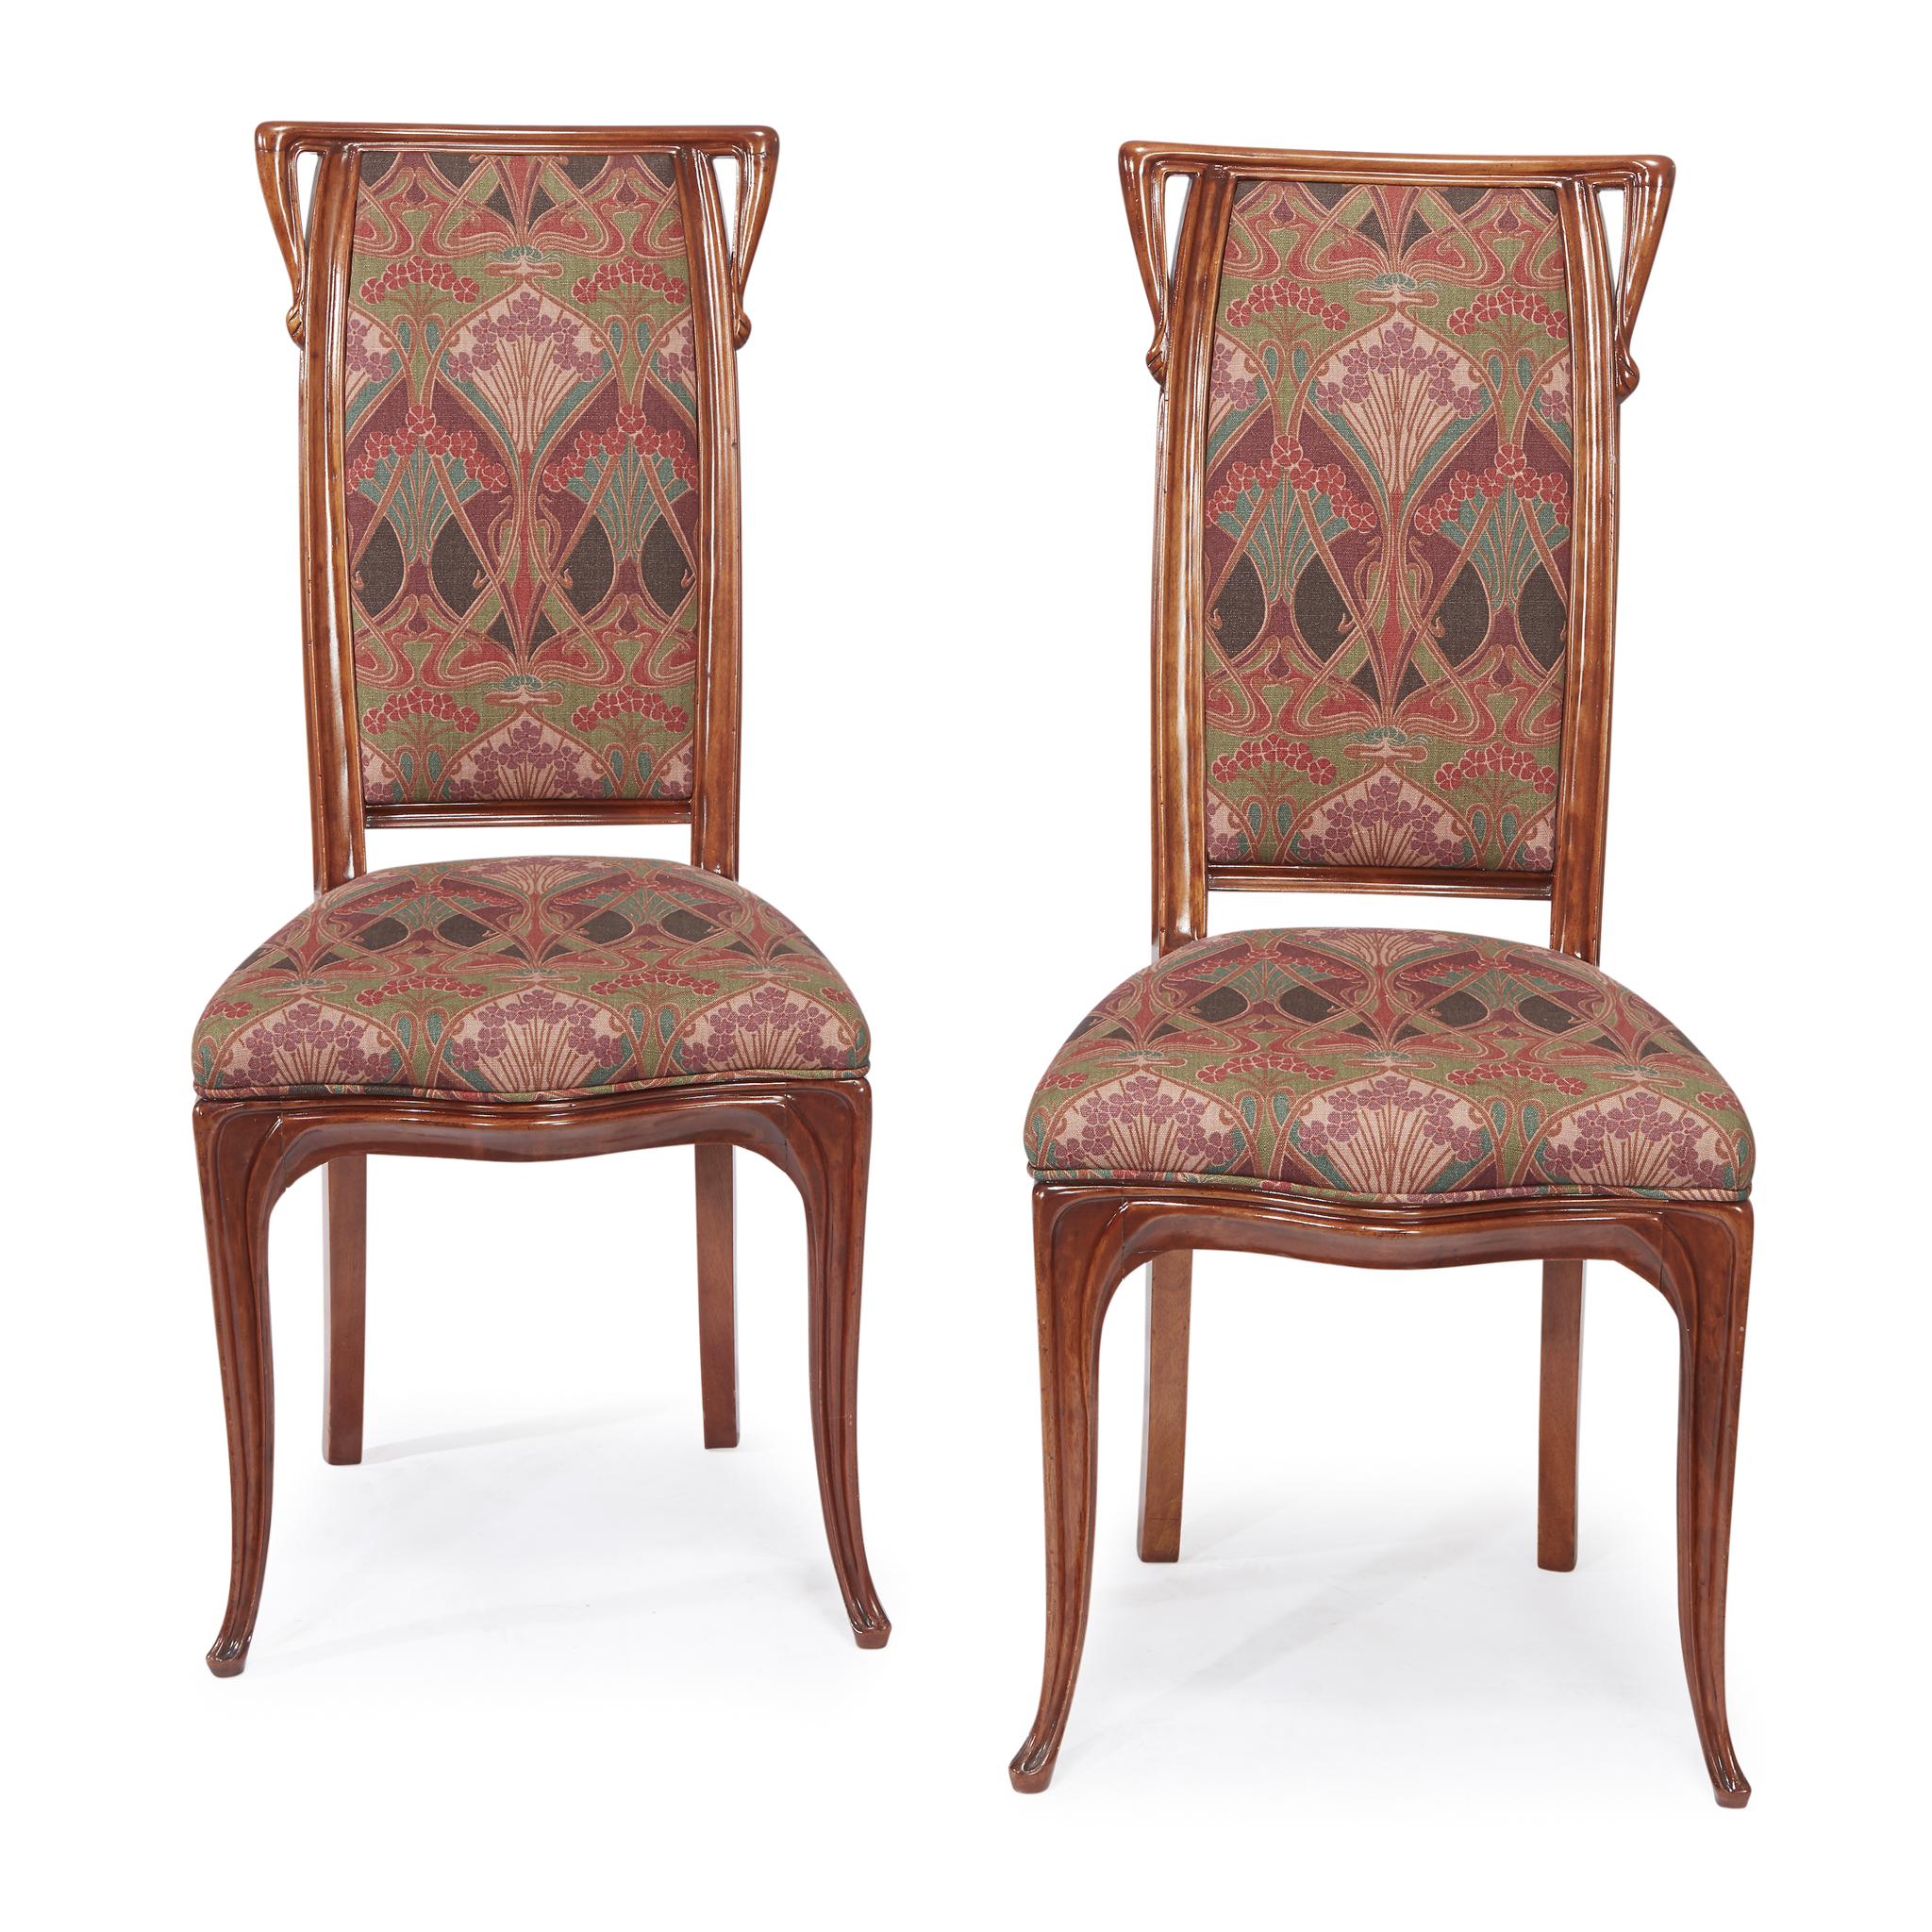 Louis Majorelle (French, 1859-1926)A Pair of Side Chairs, France, circa 1900 Carved walnut, - Image 2 of 3